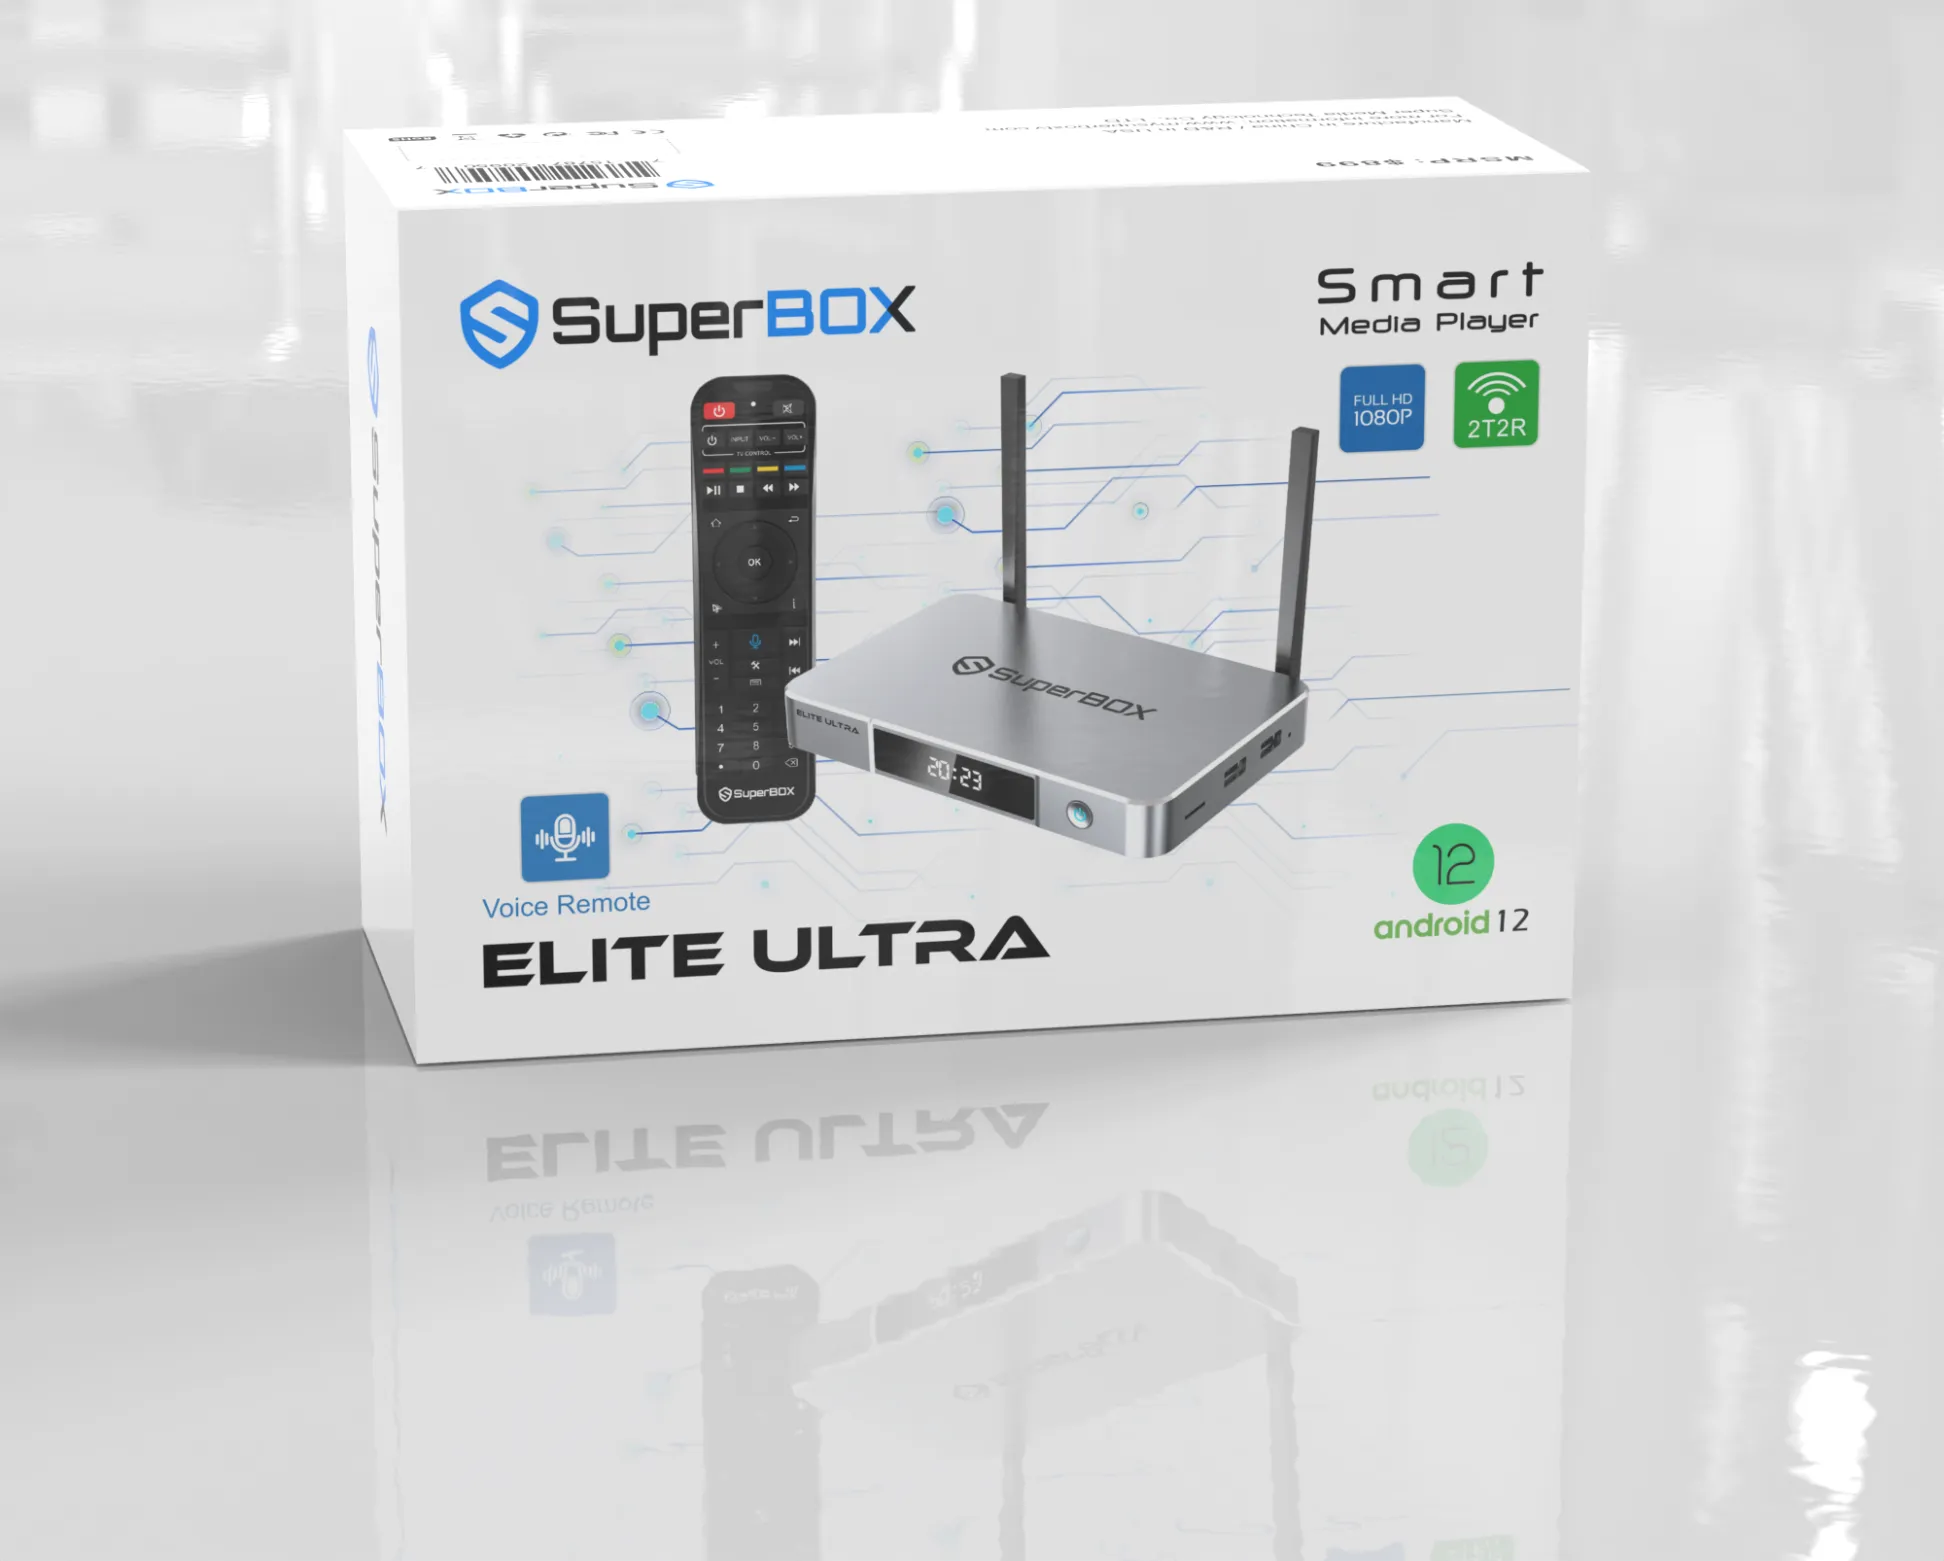 SuperBox Elite Ultra (New) Fully Load 6k 4GB Ram + 128GB, Voice Control Remote, ANDROID TV Dual Band Wi-Fi, 7 Days Playback Ultra HD 6K Video Player